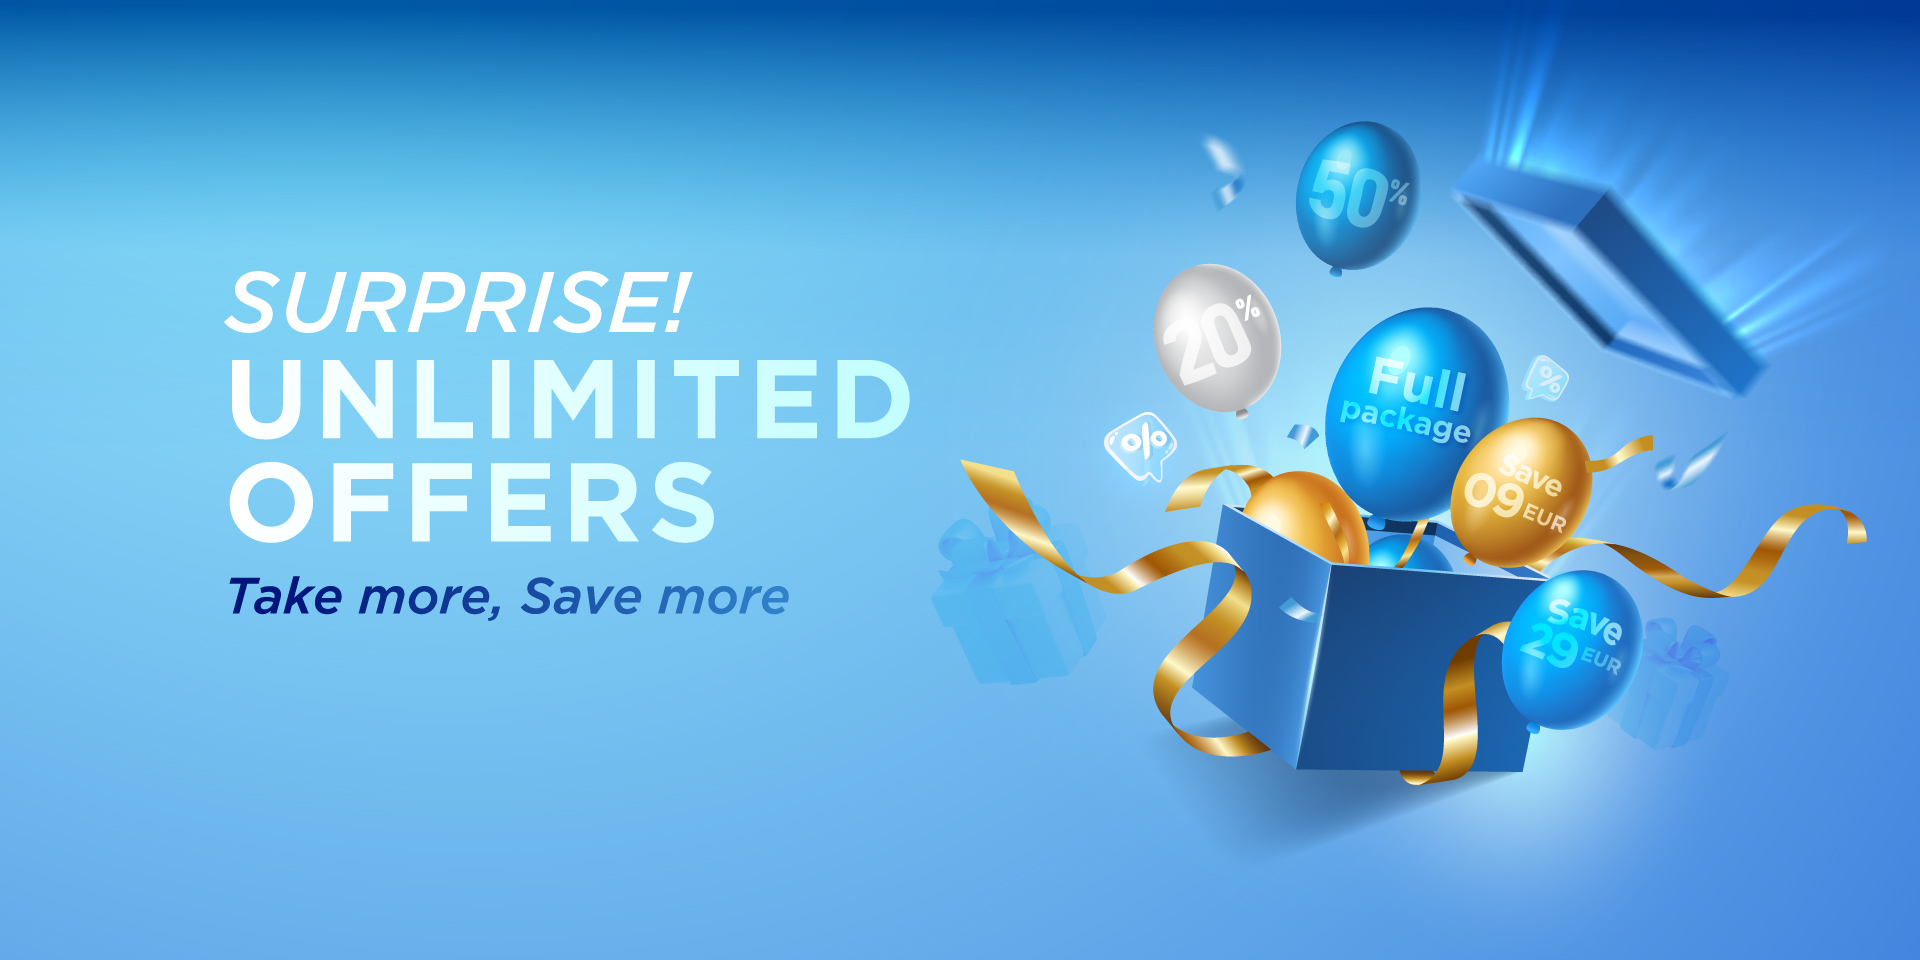 UNLIMITED OFFERS: TAKE MORE, SAVE MORE